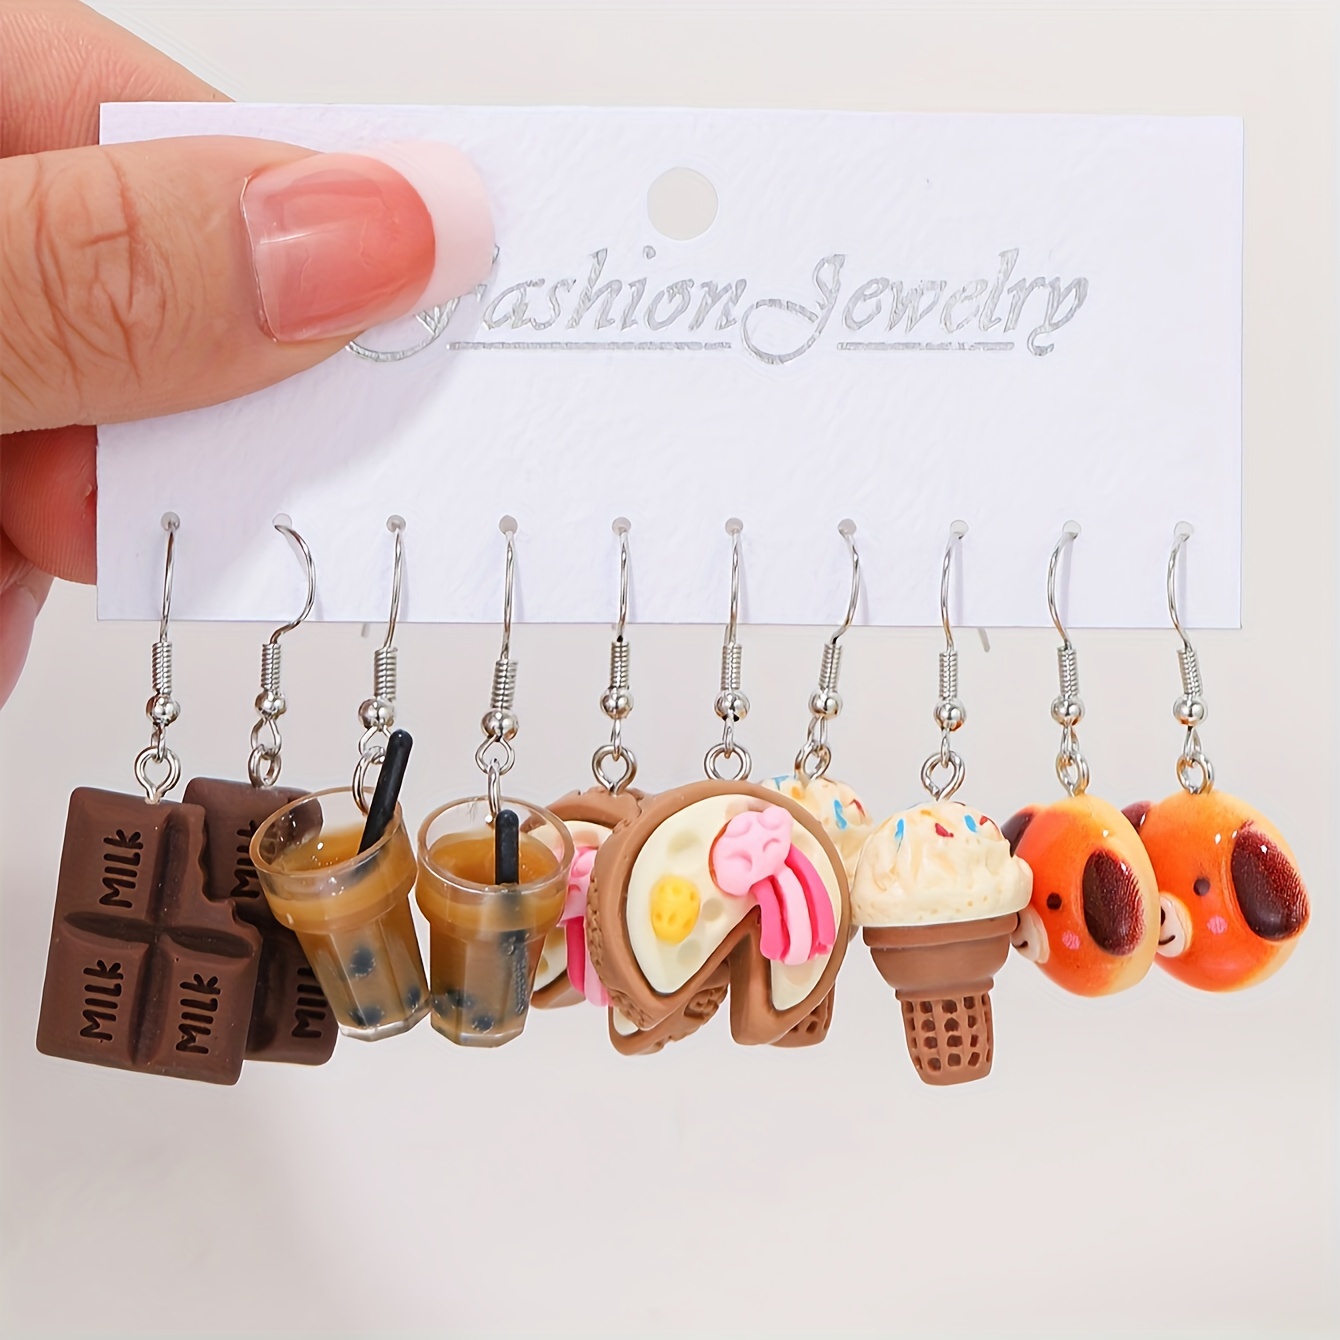 

5 Pairs Creative Chocolate Cake Design Earrings, Cute Cartoon Style Ladies Ear Studs, Quirky Fun Fashion Jewelry For Female